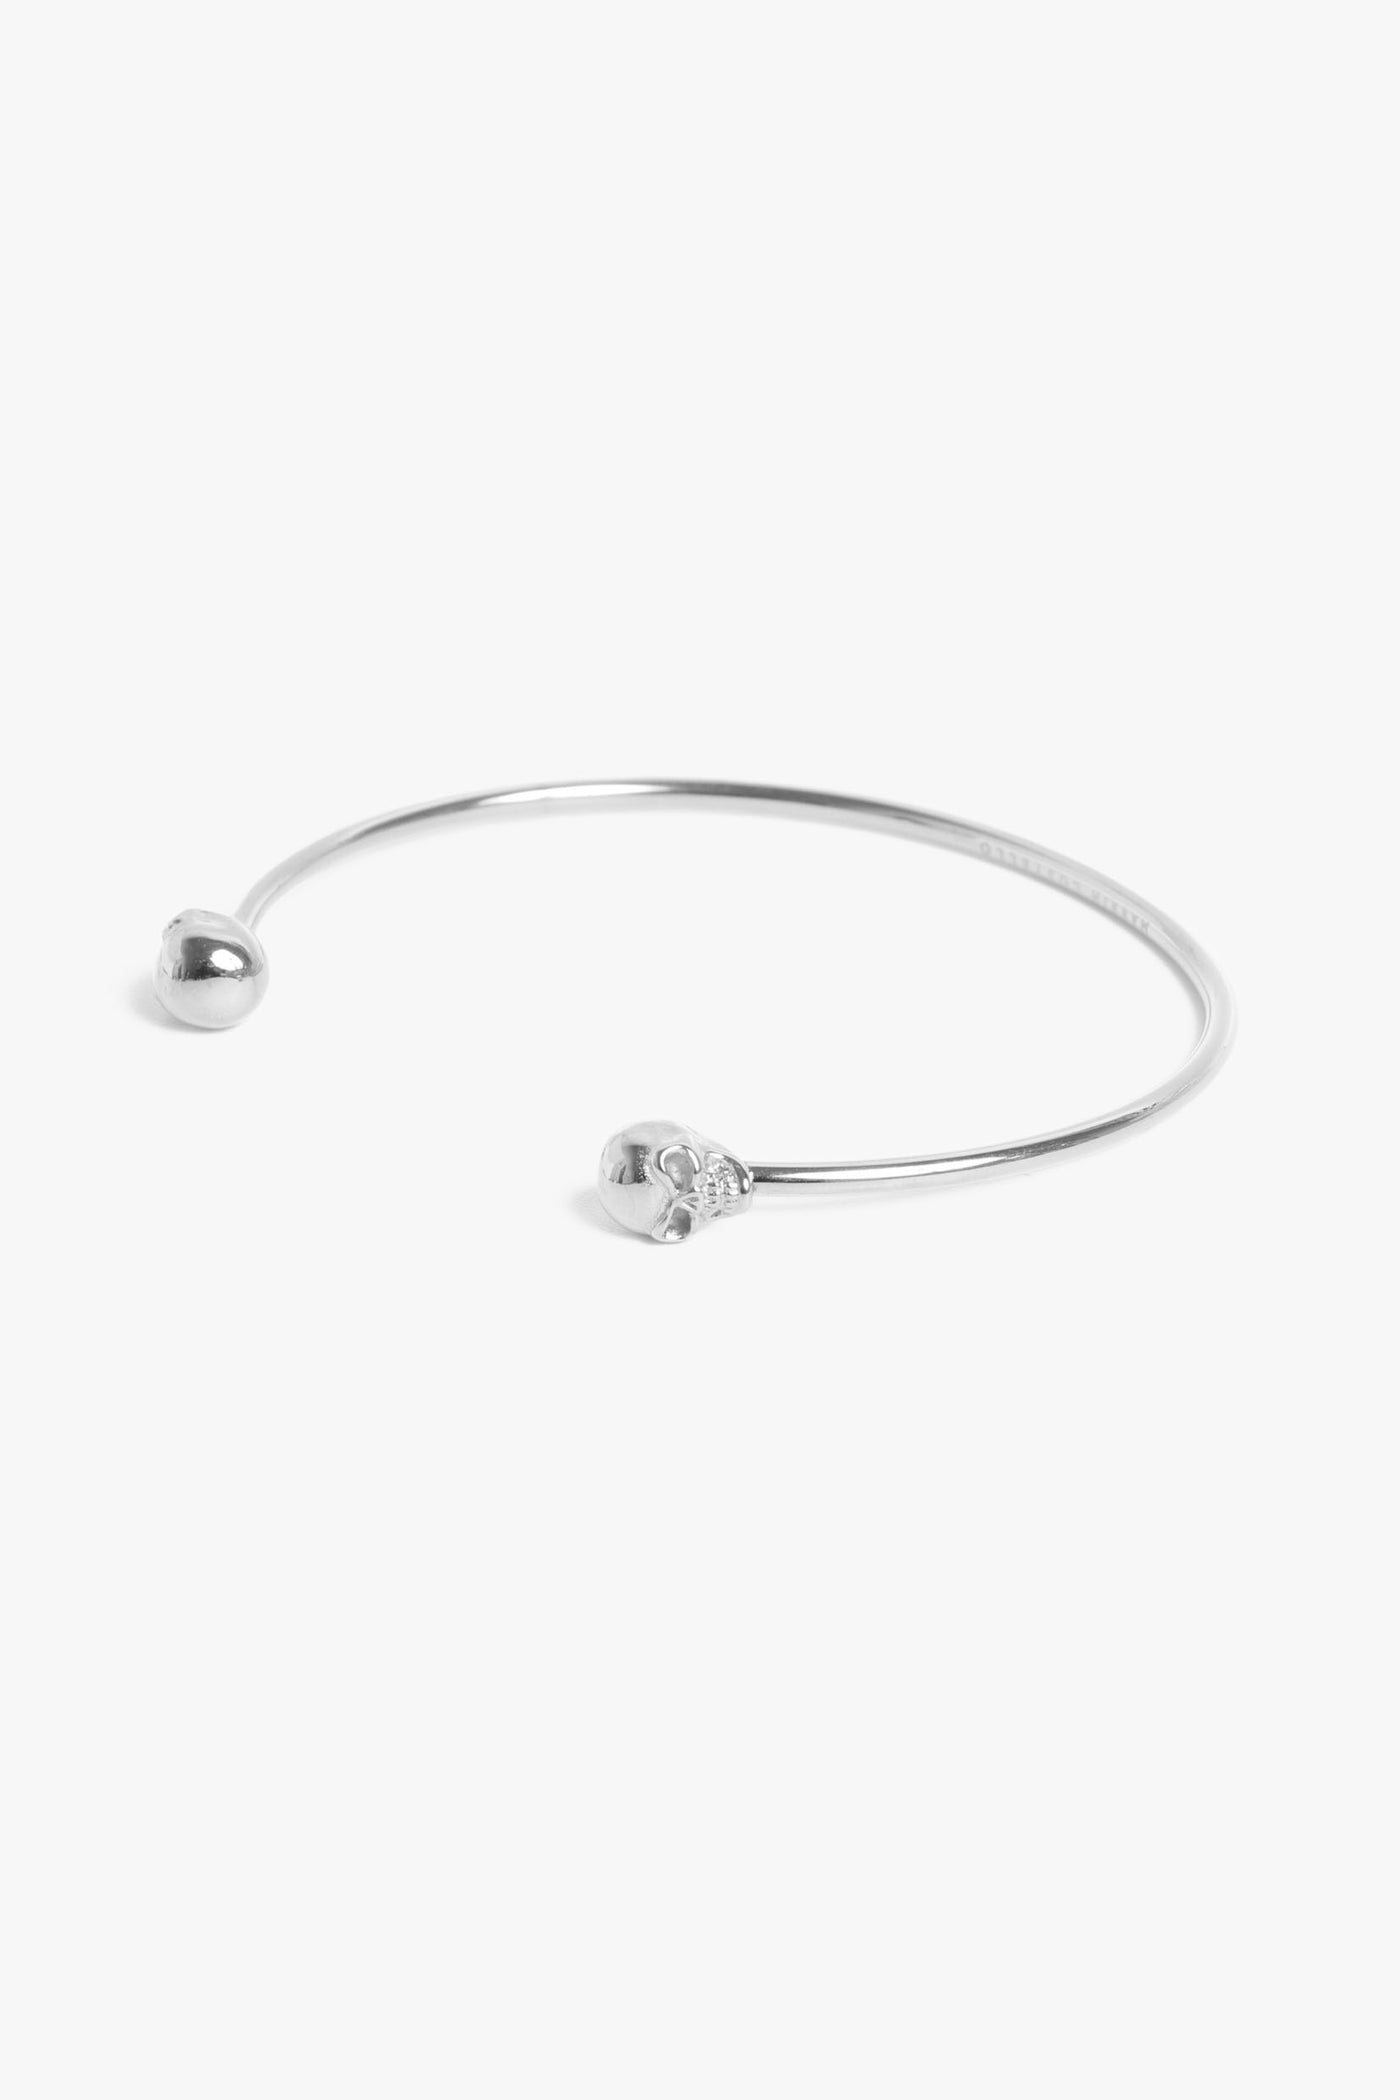 Marrin Costello Jewelry Hyde Cuff skull adjustable bracelet with cuff bracelet opening. Waterproof, sustainable, hypoallergenic. Polished stainless steel.